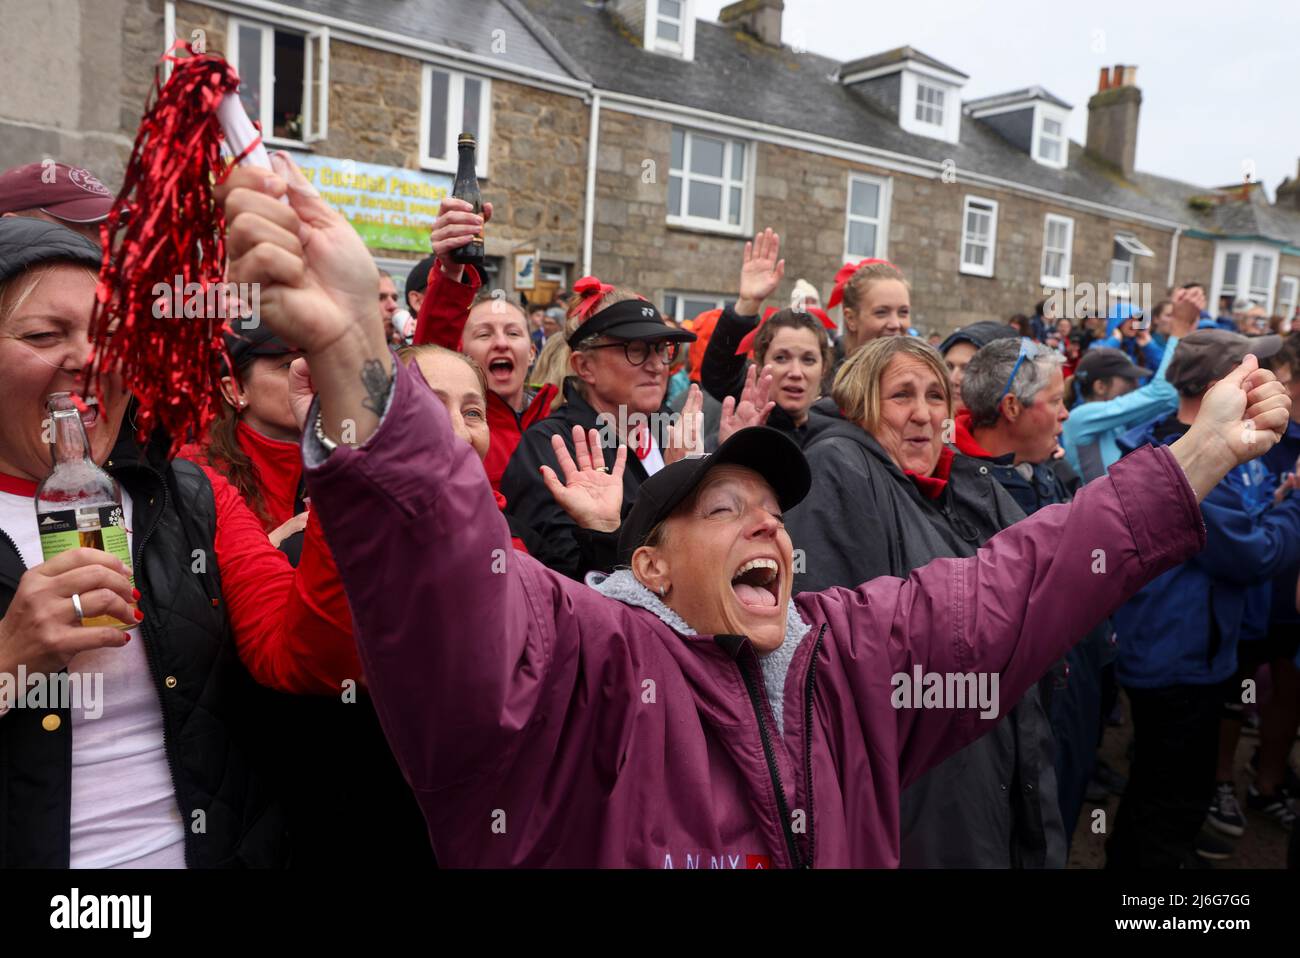 Spectators watch the awards ceremony at the World Pilot Gig rowing Championships in Hugh Town, St Mary's, in the Isles of Scilly, Britain, May 1, 2022. REUTERS/Tom Nicholson Stock Photo